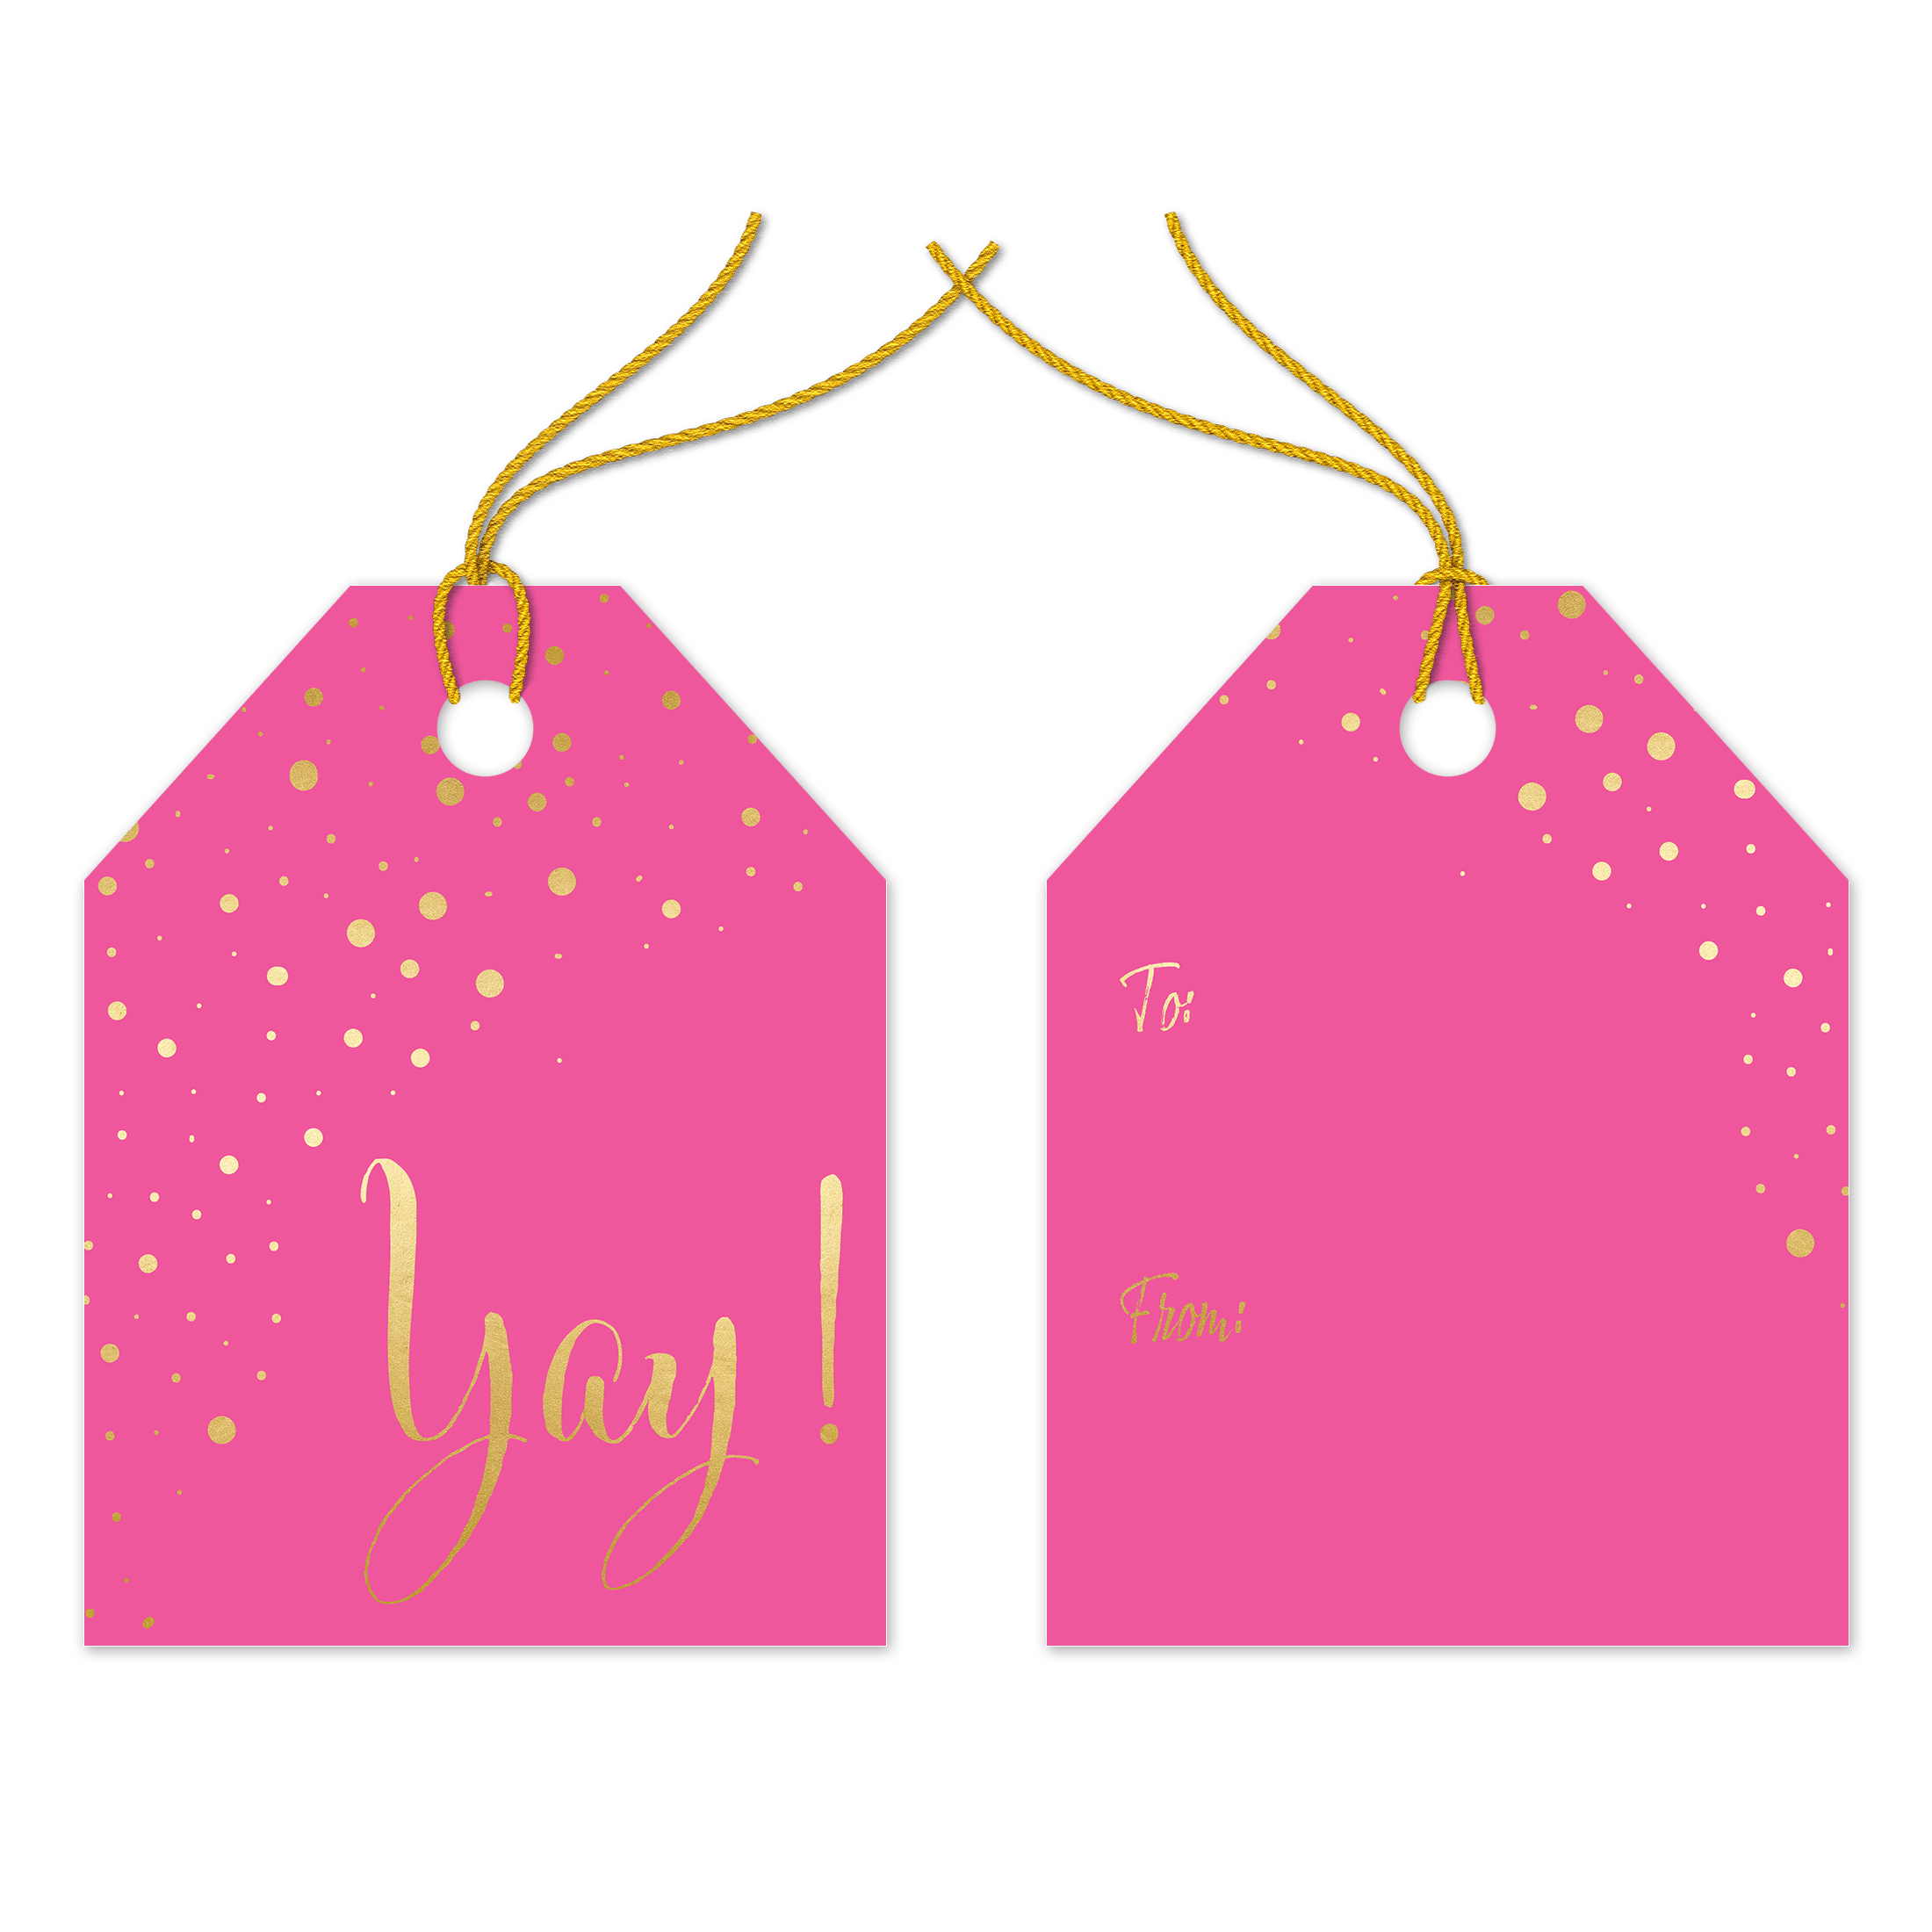 Gold Confetti Assortment Gift Tags - Pro Supply Global